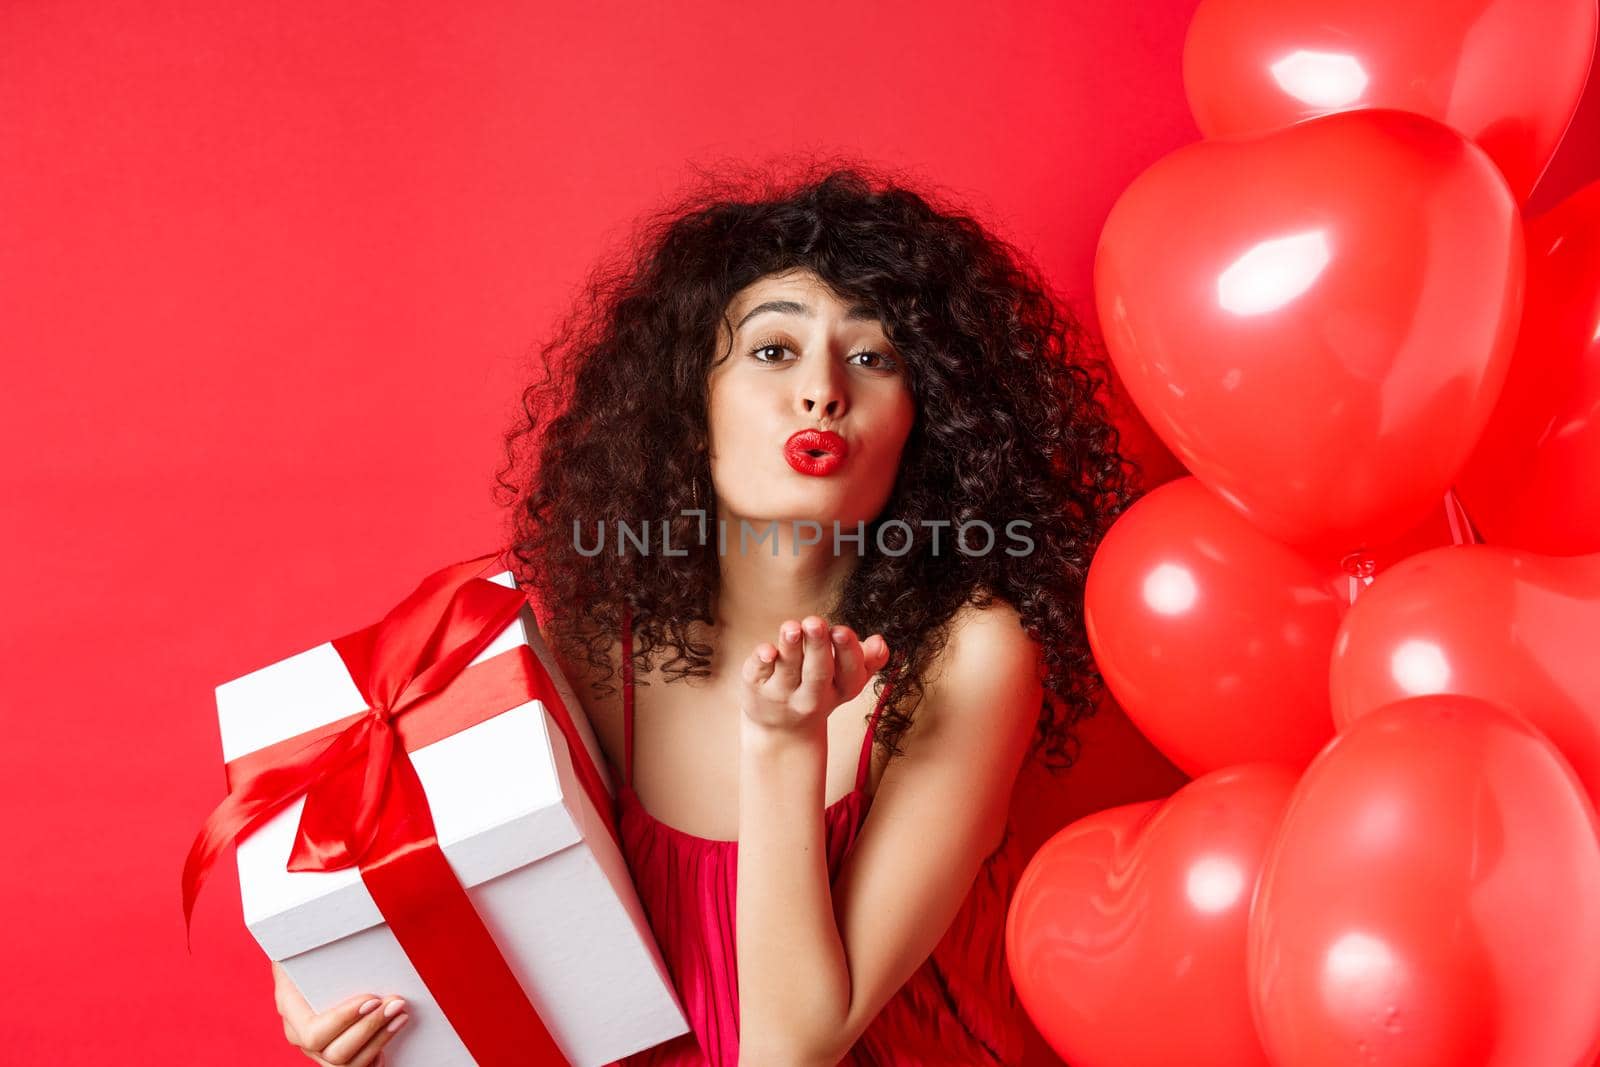 Romance and Valentines day concept. Pretty curly-haired girl in red dress sending her love, blowing air kiss at camera, holding gift from lover, standing near hearts on red background.